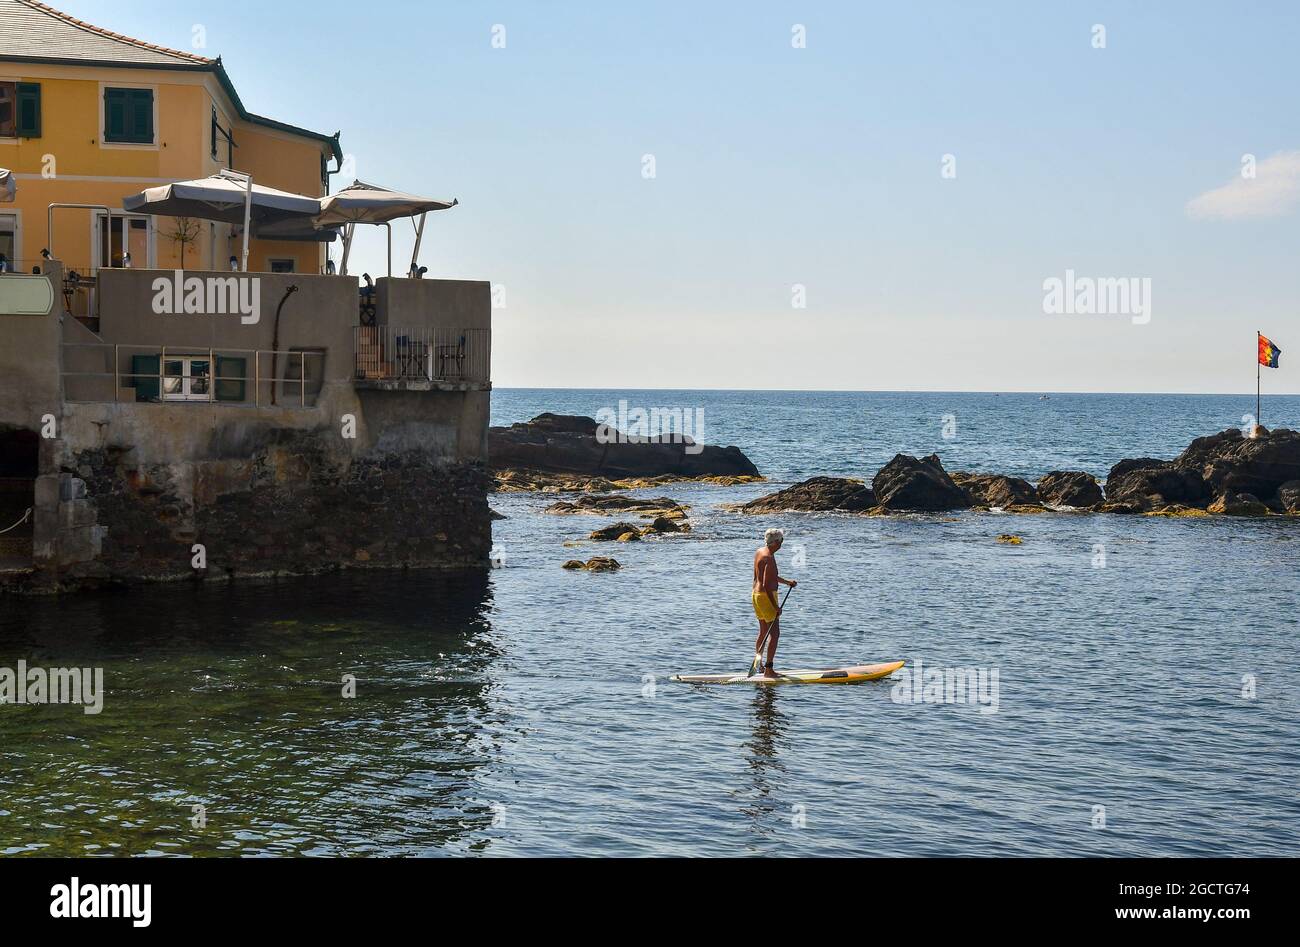 Senior man stand up paddle boarding (SUP) on the shore of the fishing village with a terrace restaurant in the background, Boccadasse, Genoa, Liguria Stock Photo